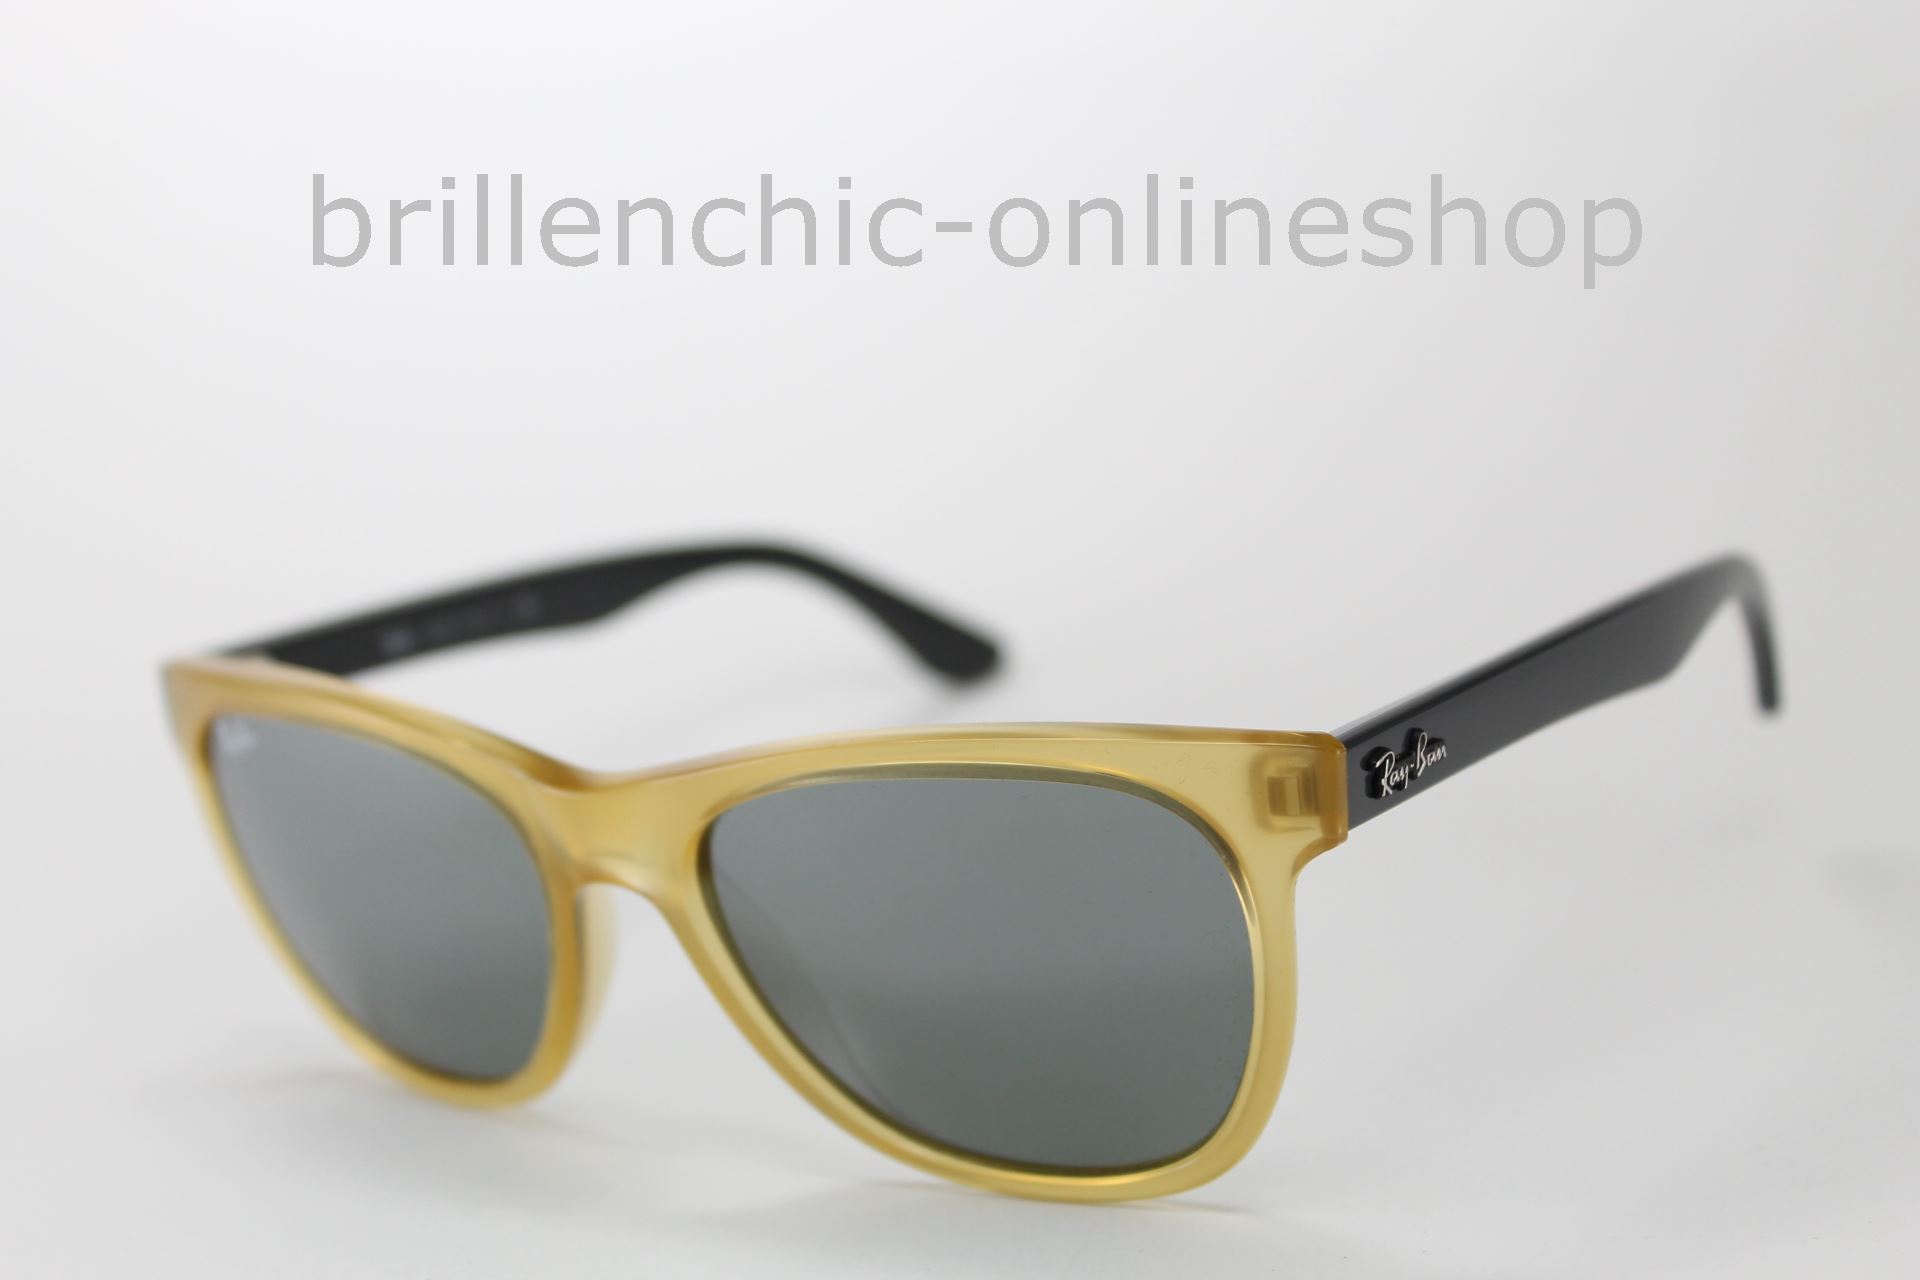 Brillenchic-onlineshop in Berlin - Ray Ban RB 4184 6043/40